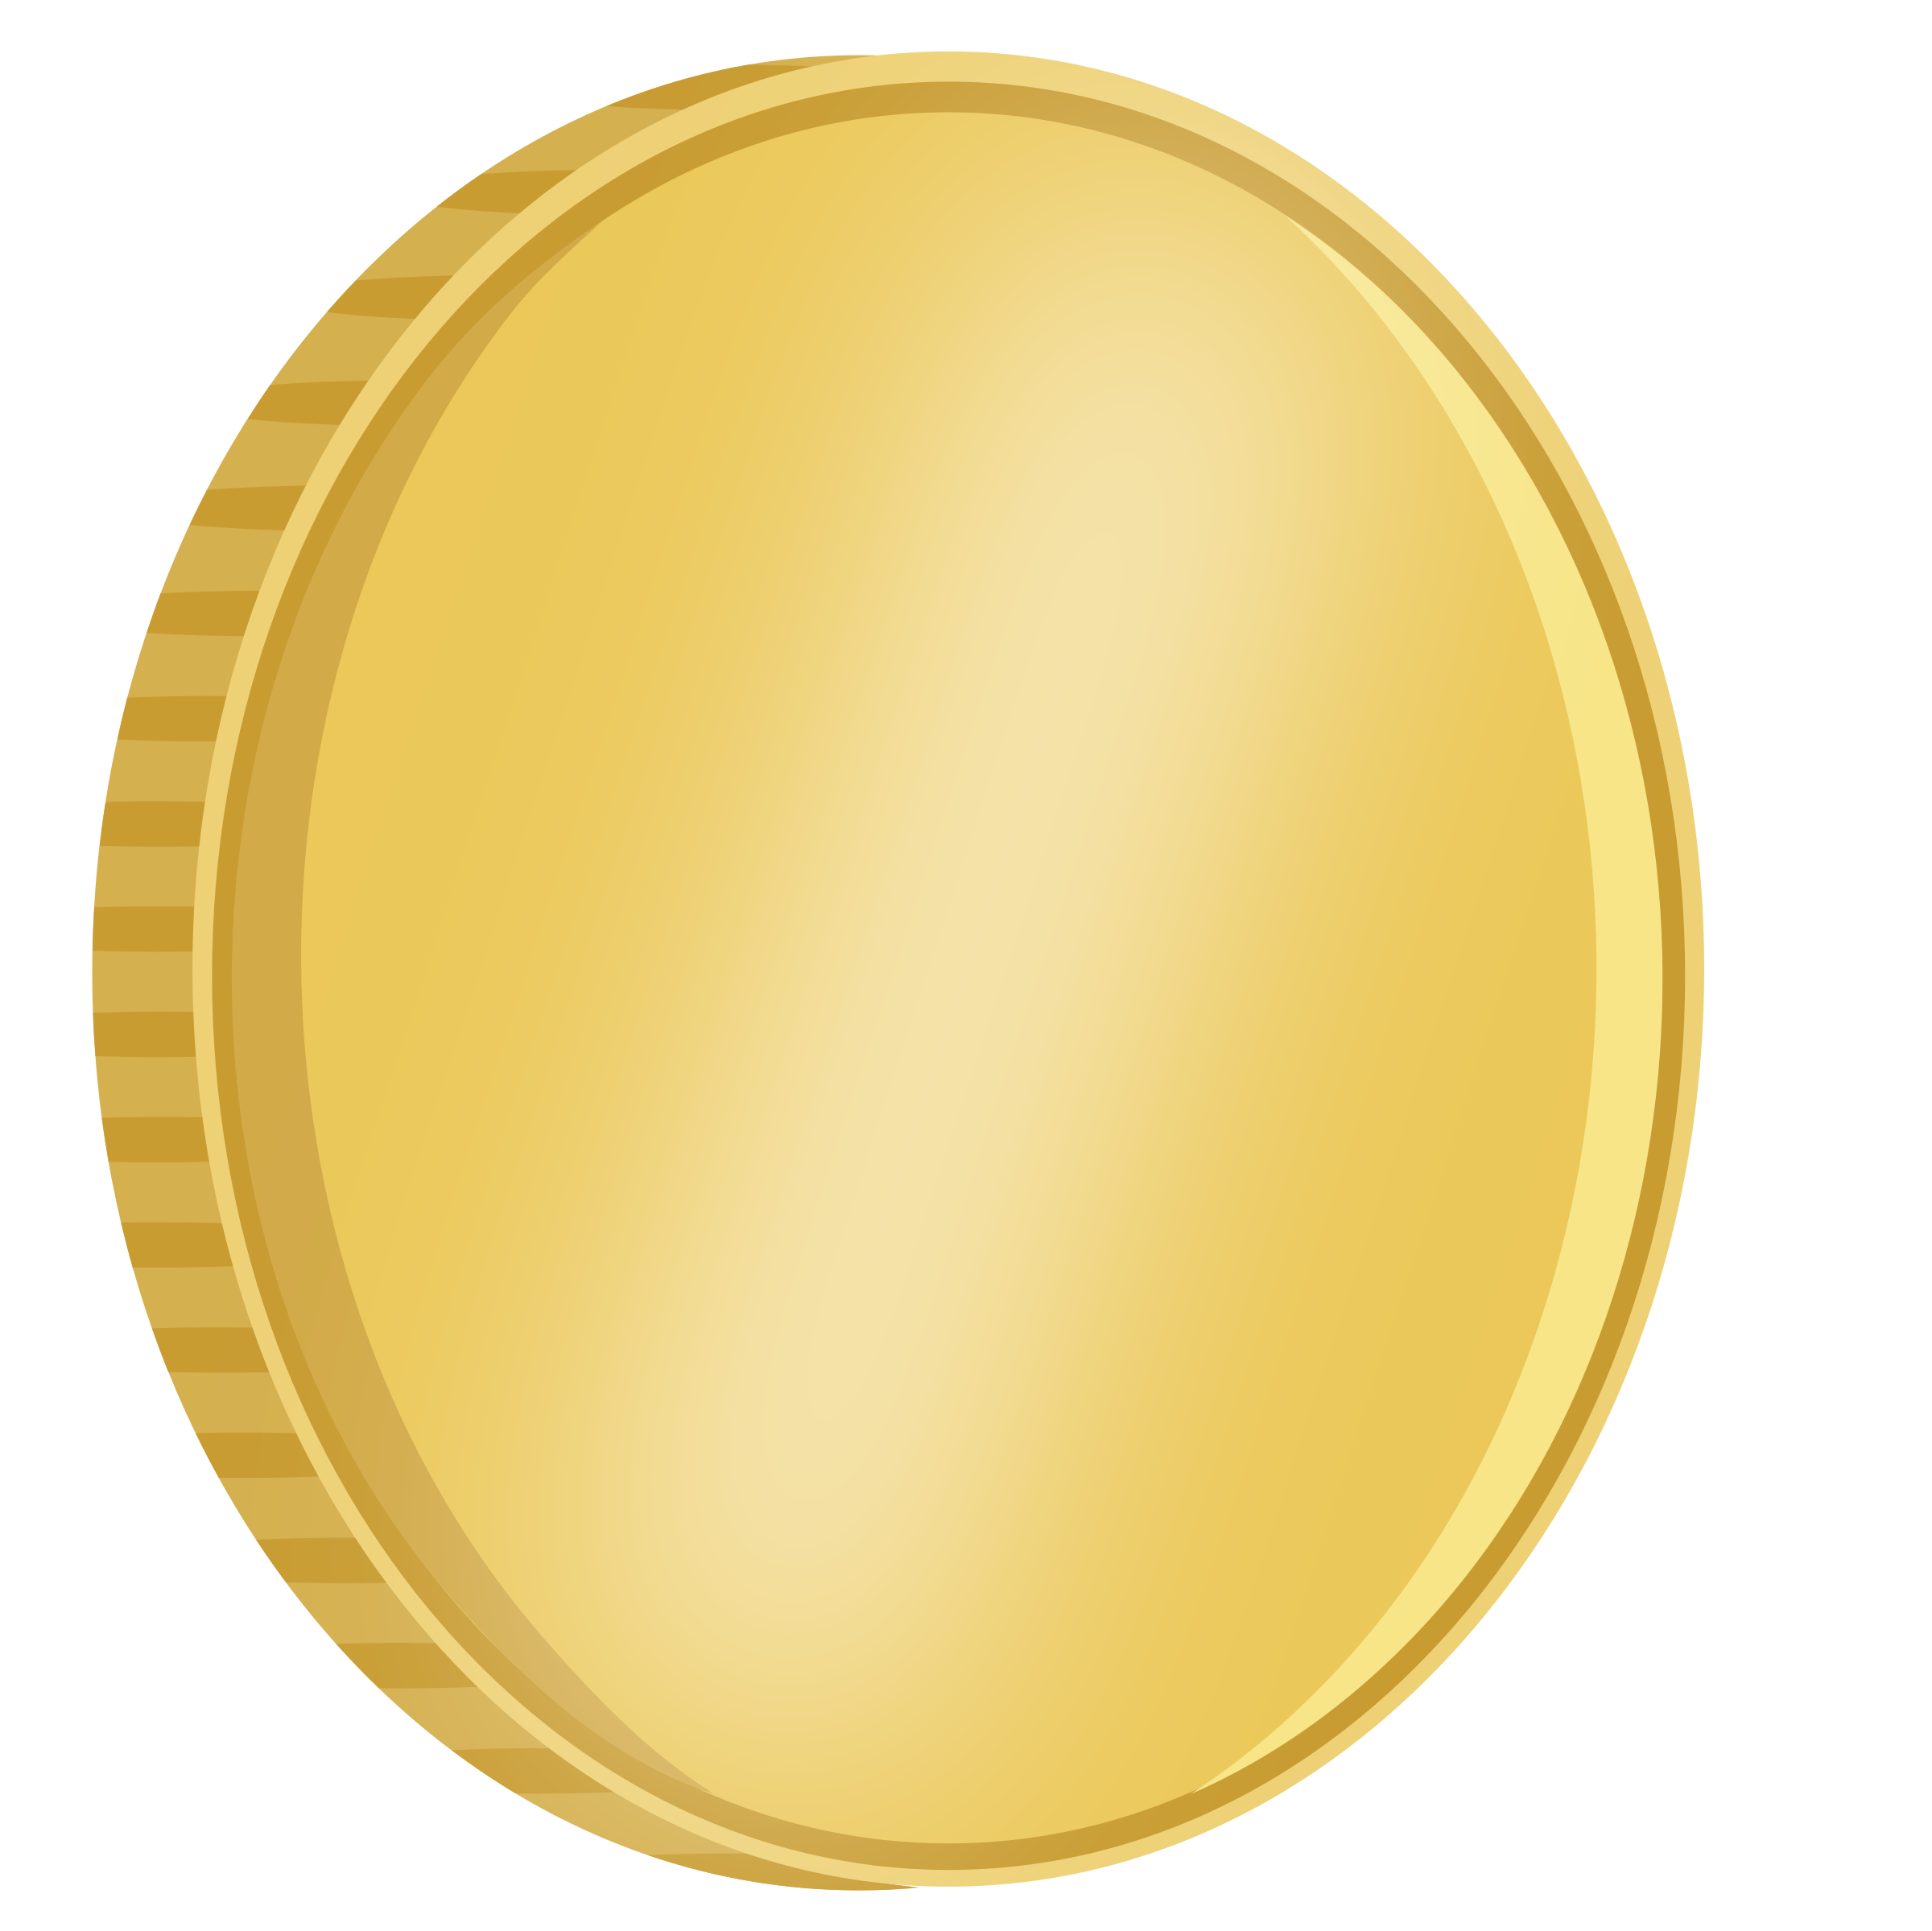 Gold Coin Png Image - Coin Border, Transparent background PNG HD thumbnail